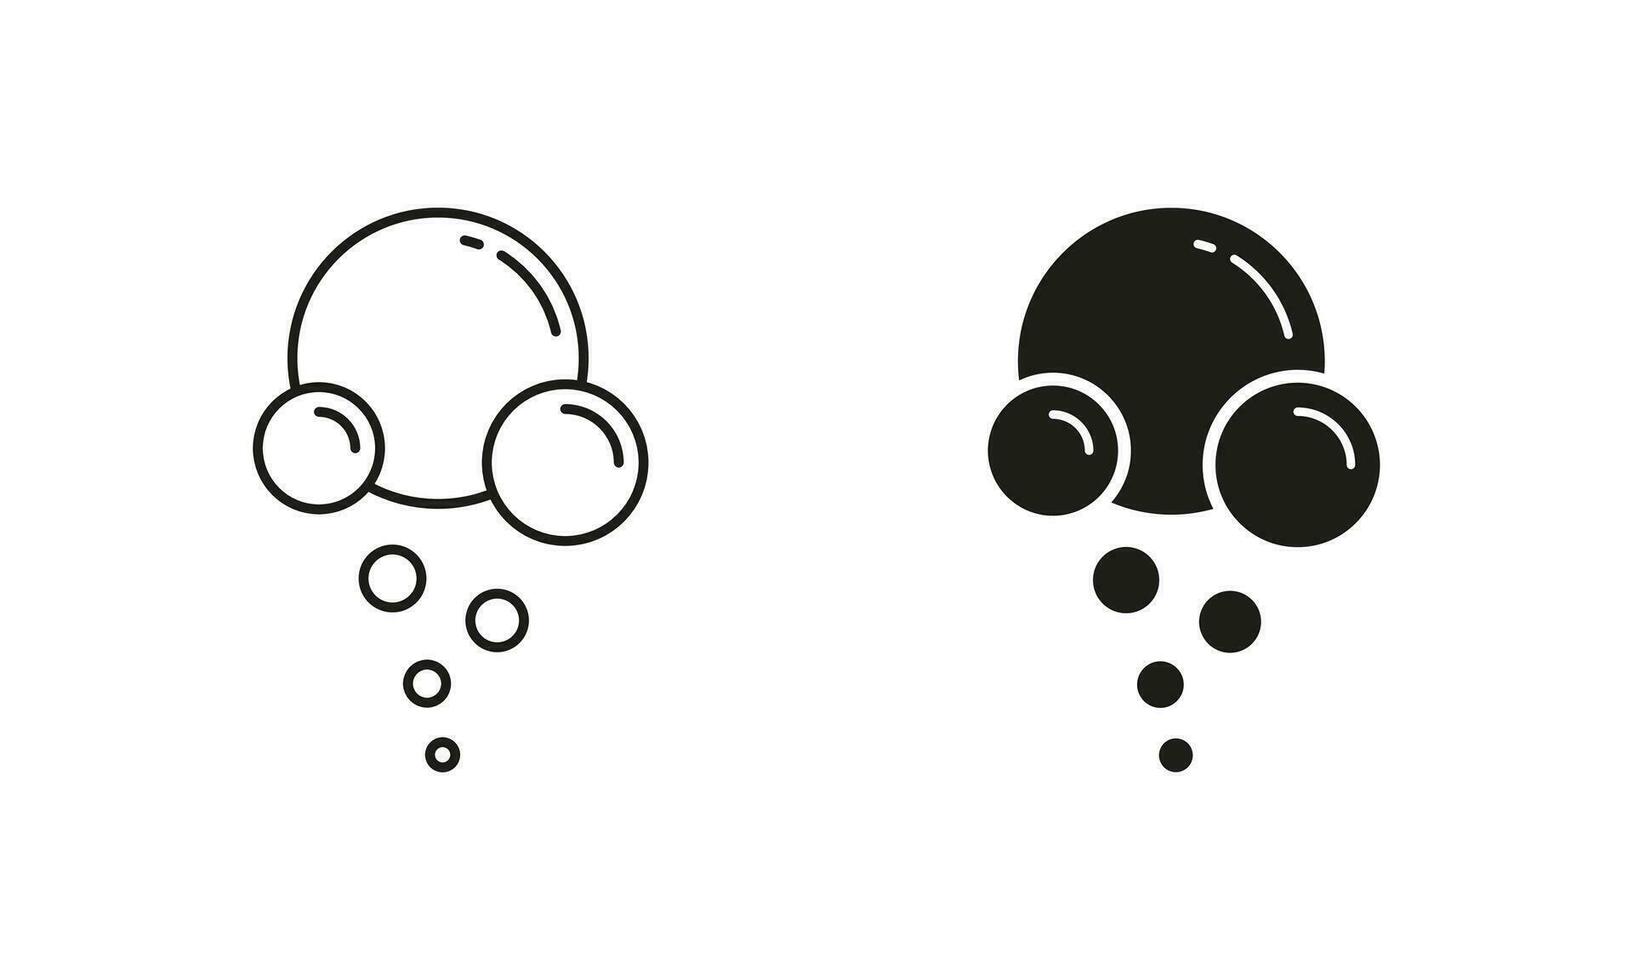 Air Oxygen, Bubble Soap, Soda Pictogram. Champagne Sphere Drops, Clear Aqua Symbol Collection. Clean Water, Foam Line and Silhouette Black Icon Set. Underwater Ball. Isolated Vector Illustration.